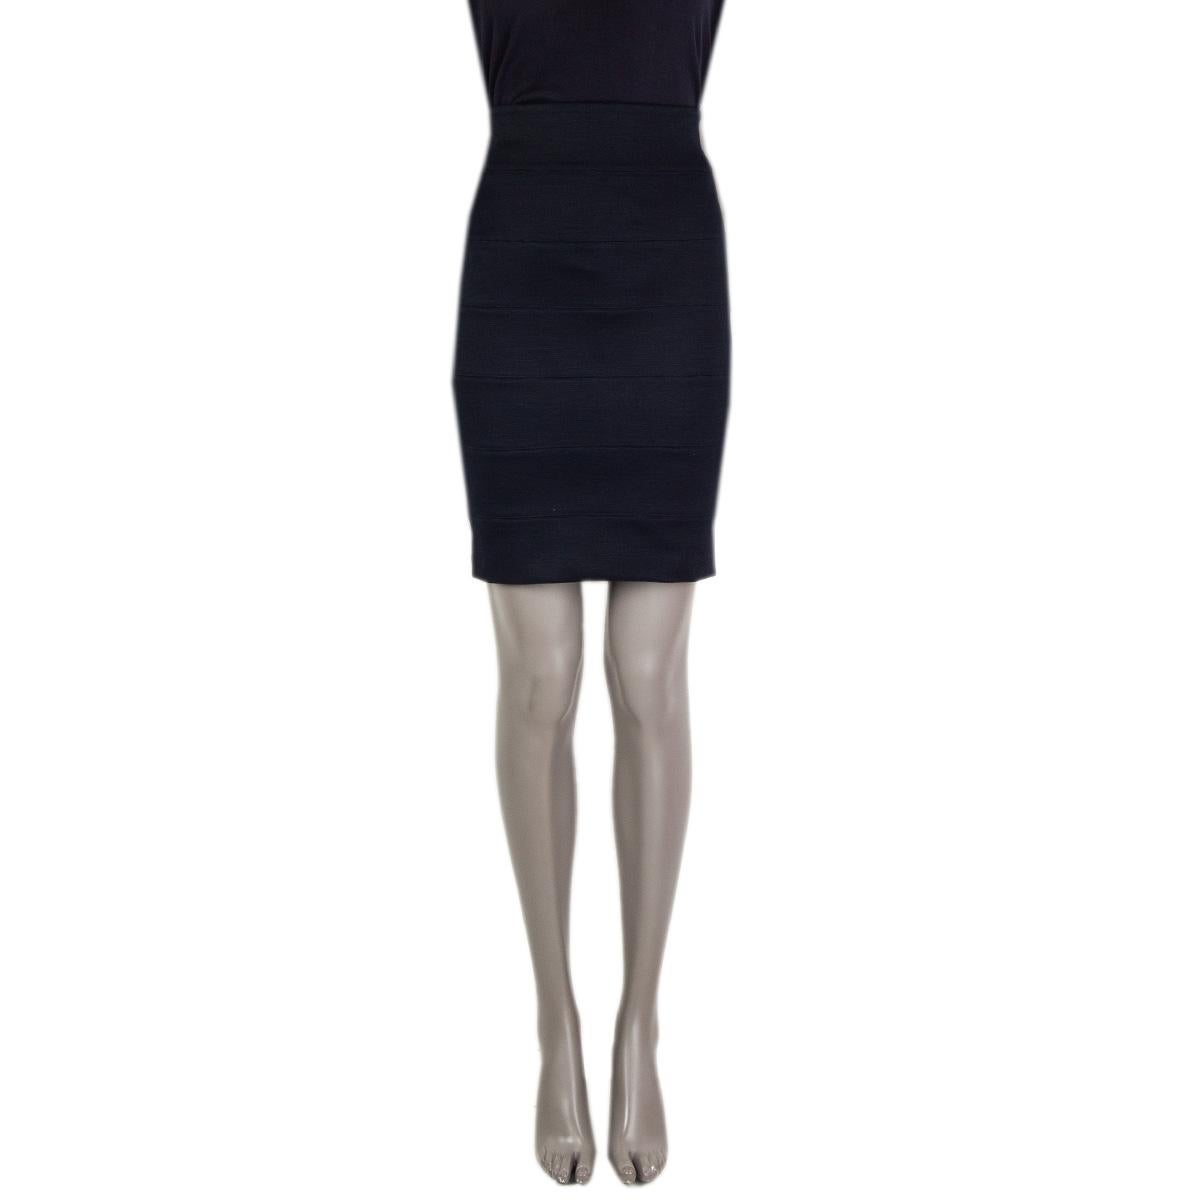 100% authentic The Row stretch sheath mini skirt in midnight blue wool (78%), polyamide (15%) and elastane (7%). Lined in midnight blue silk (95%) and elastane (5%). Opens with a concealed zipper on the back. Has been worn and is in excellent